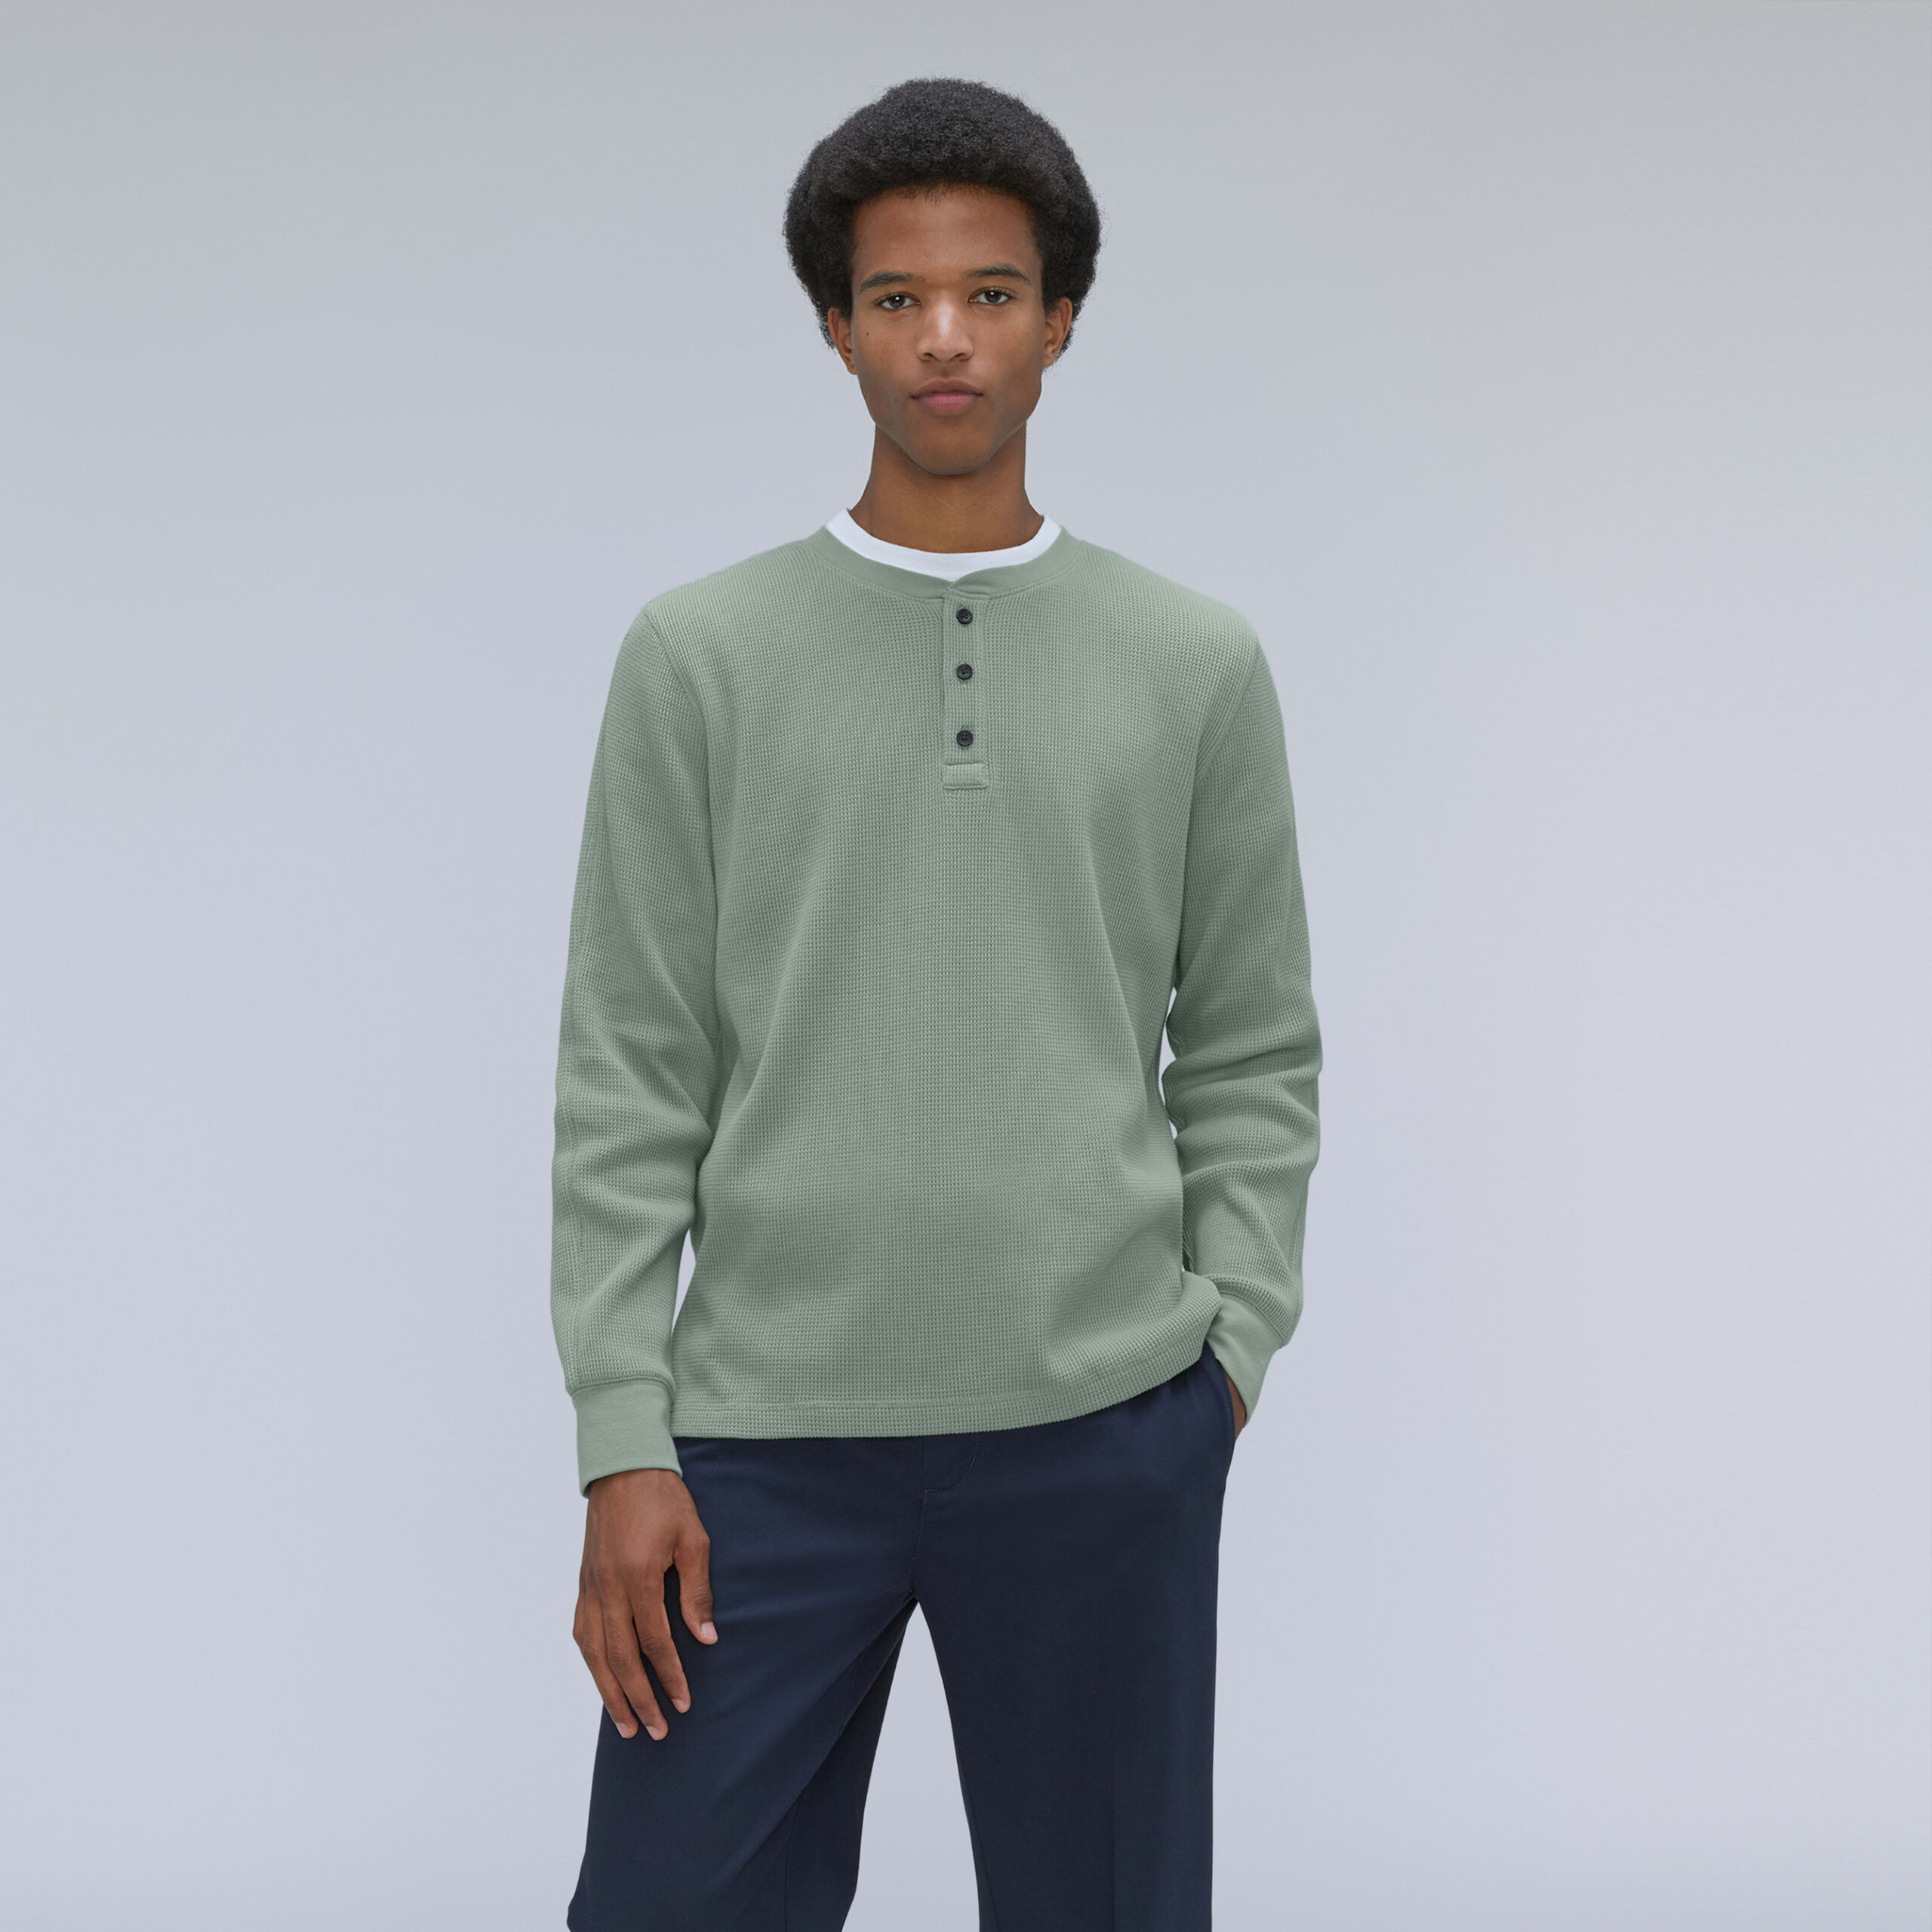 Men's Waffle Long-Sleeve Henley T-Shirt by Everlane in Lily Pad - IndieGetup